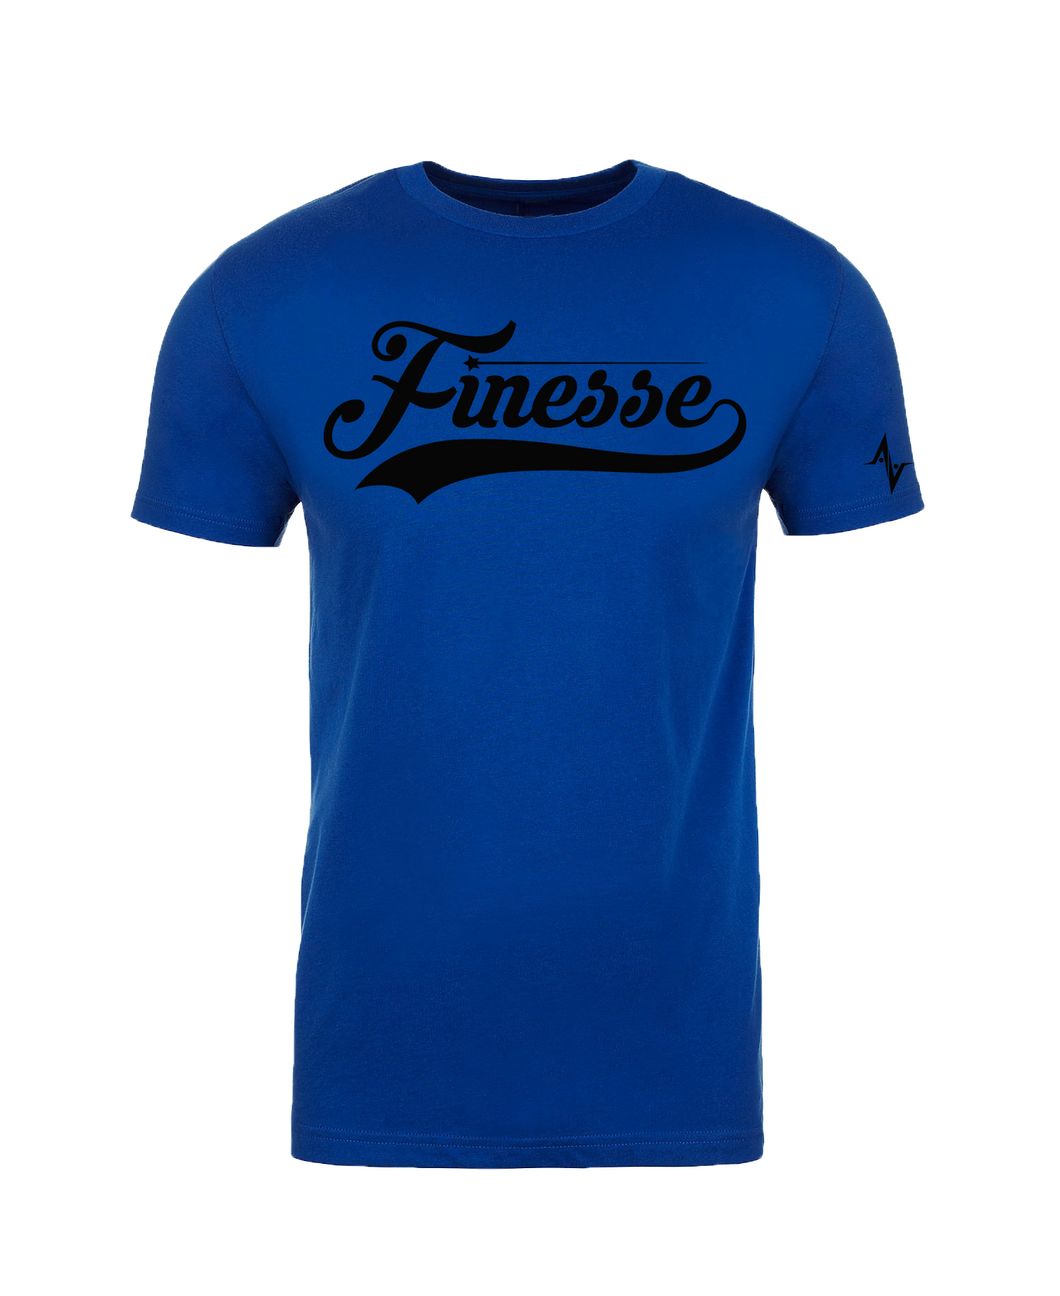 Finesse Royal Blue Sueded Tee